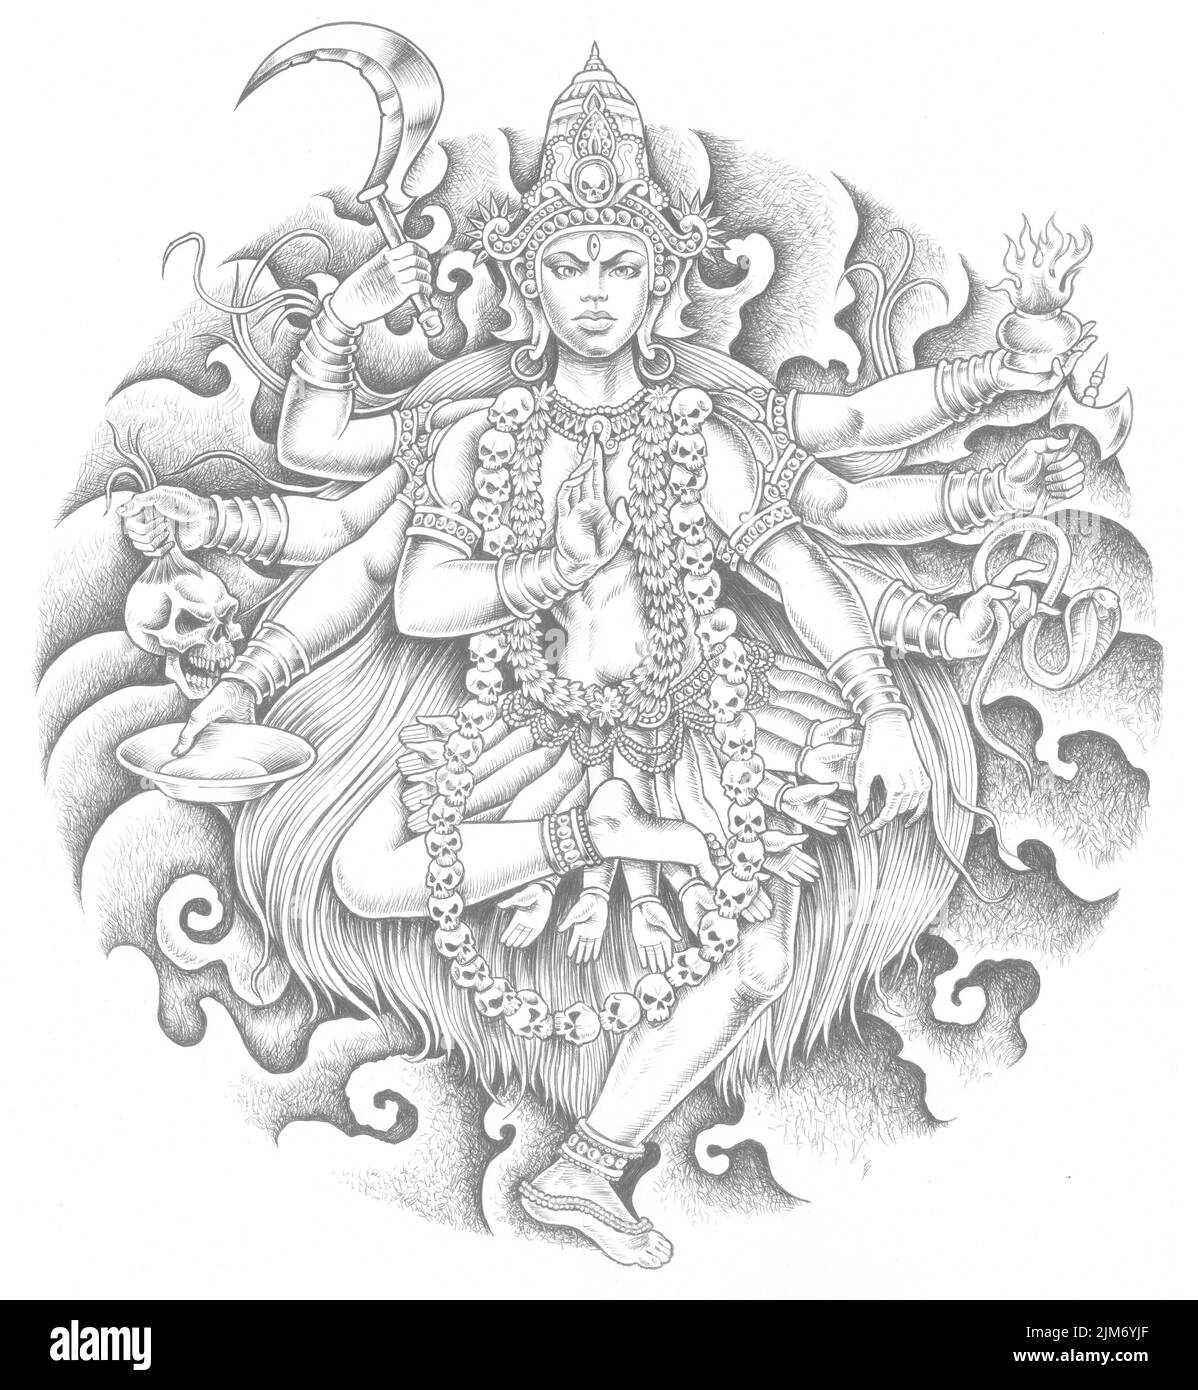 Authentic Drawing Shiva Images - Free Download on Freepik